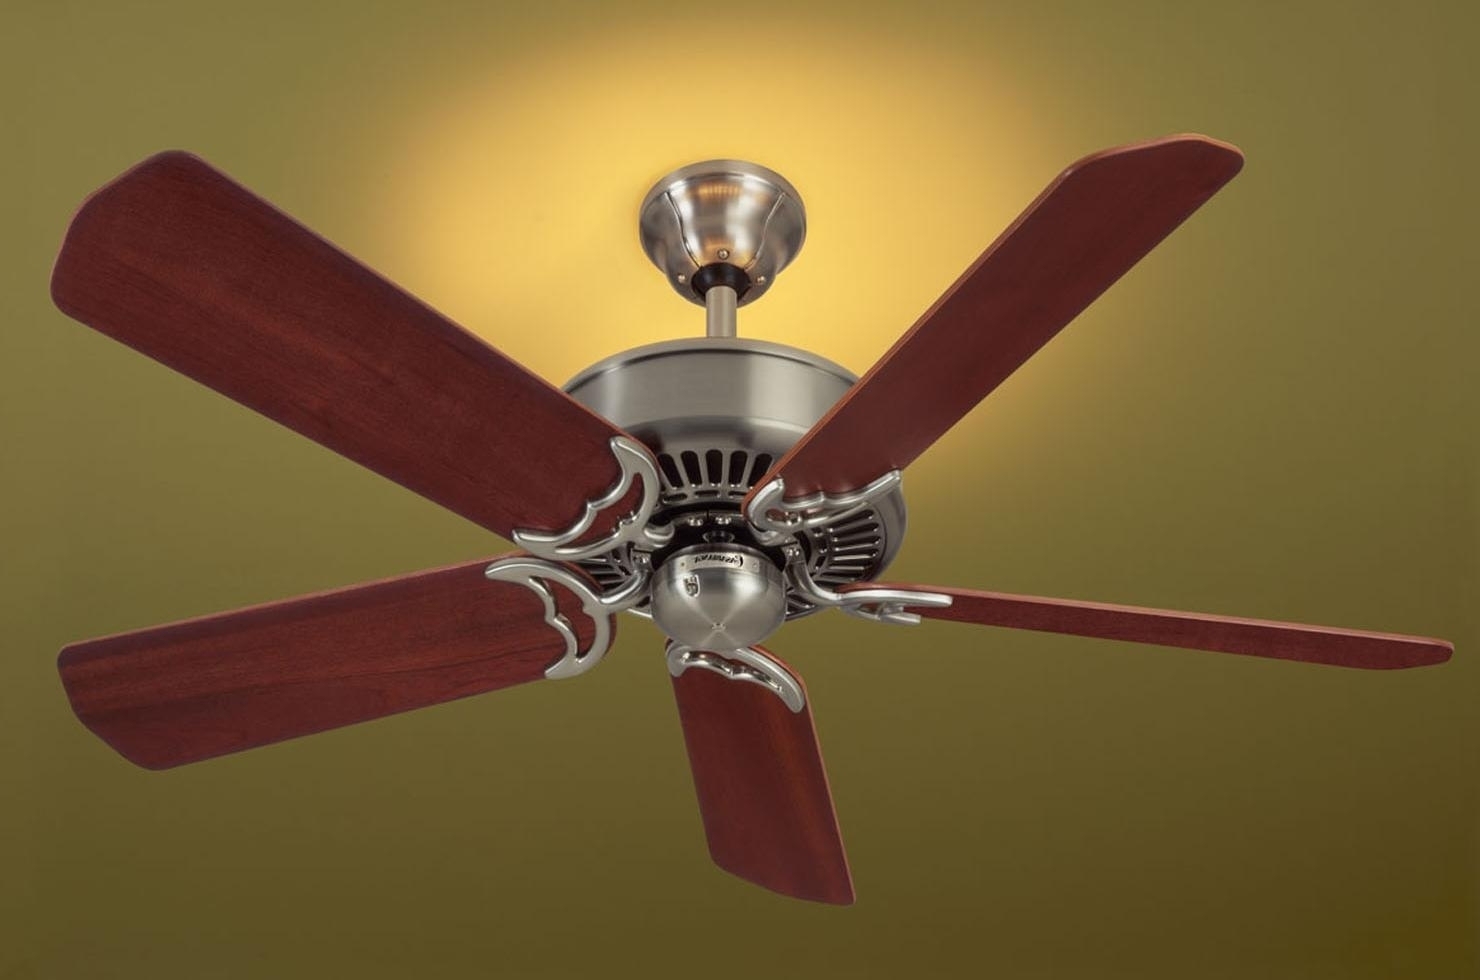 Airplane Propeller Ceiling Fan Ideas Home Decor — Randolph Indoor and Outdoor Design